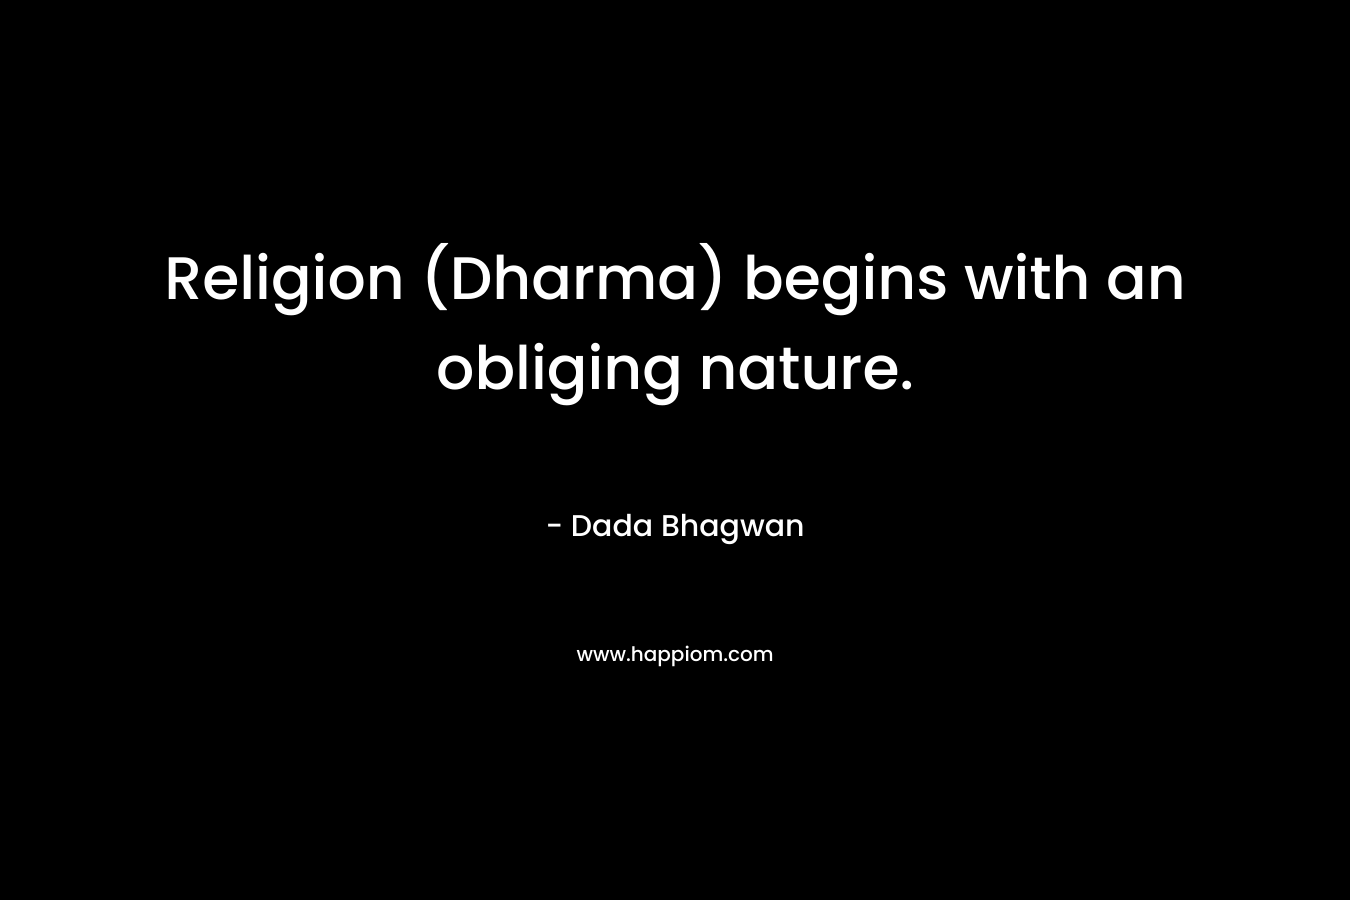 Religion (Dharma) begins with an obliging nature.